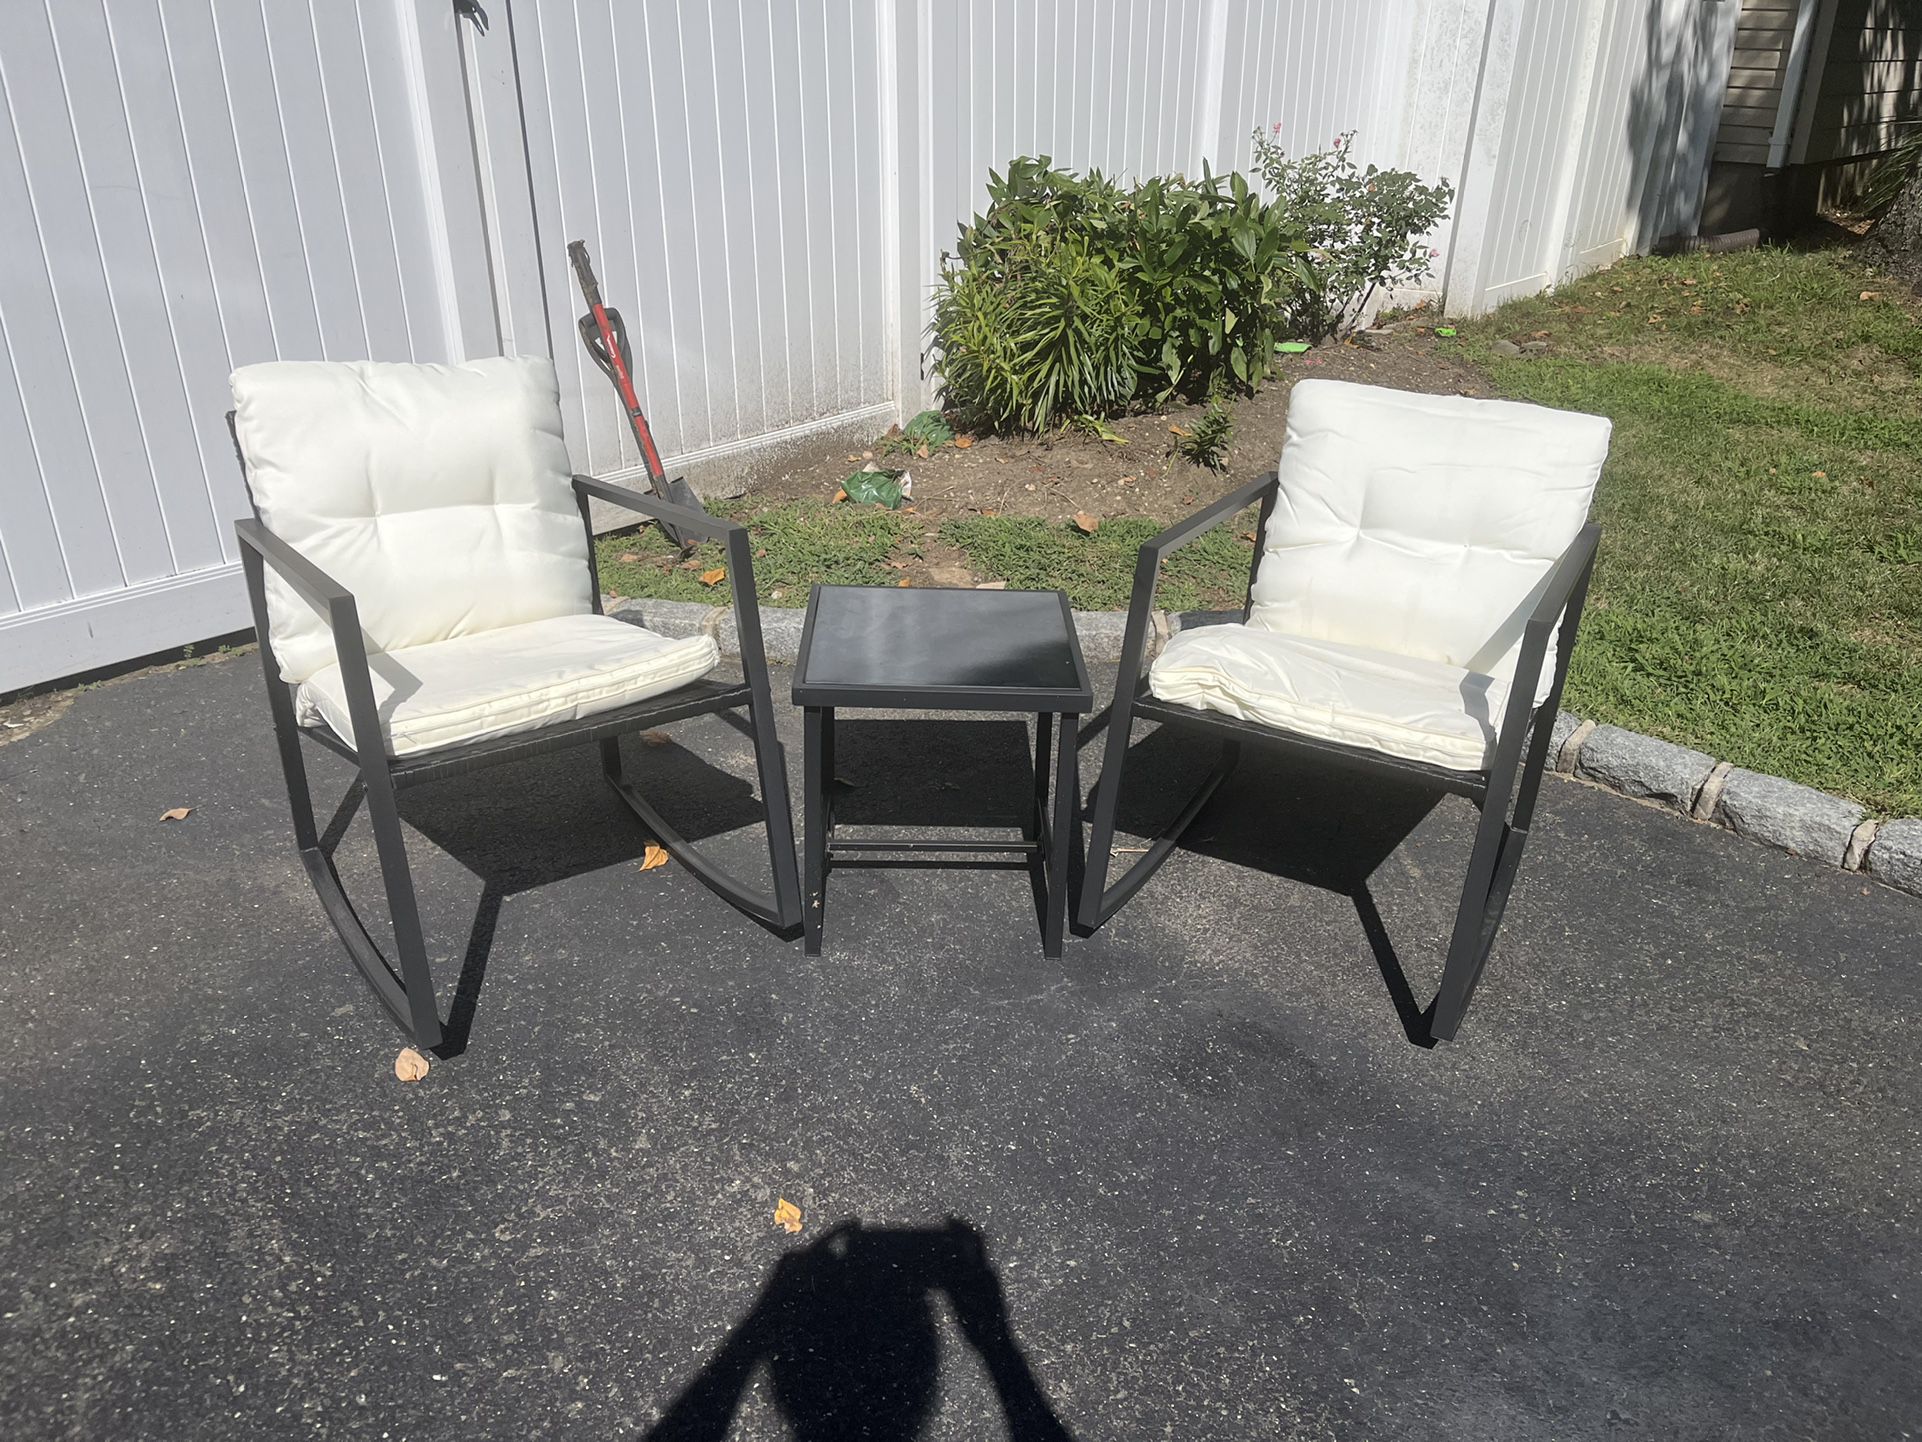 3-Piece Patio Rocking Chairs With Table And Cushions Cushion Cabinet Holder And Water Proof Chair Covers